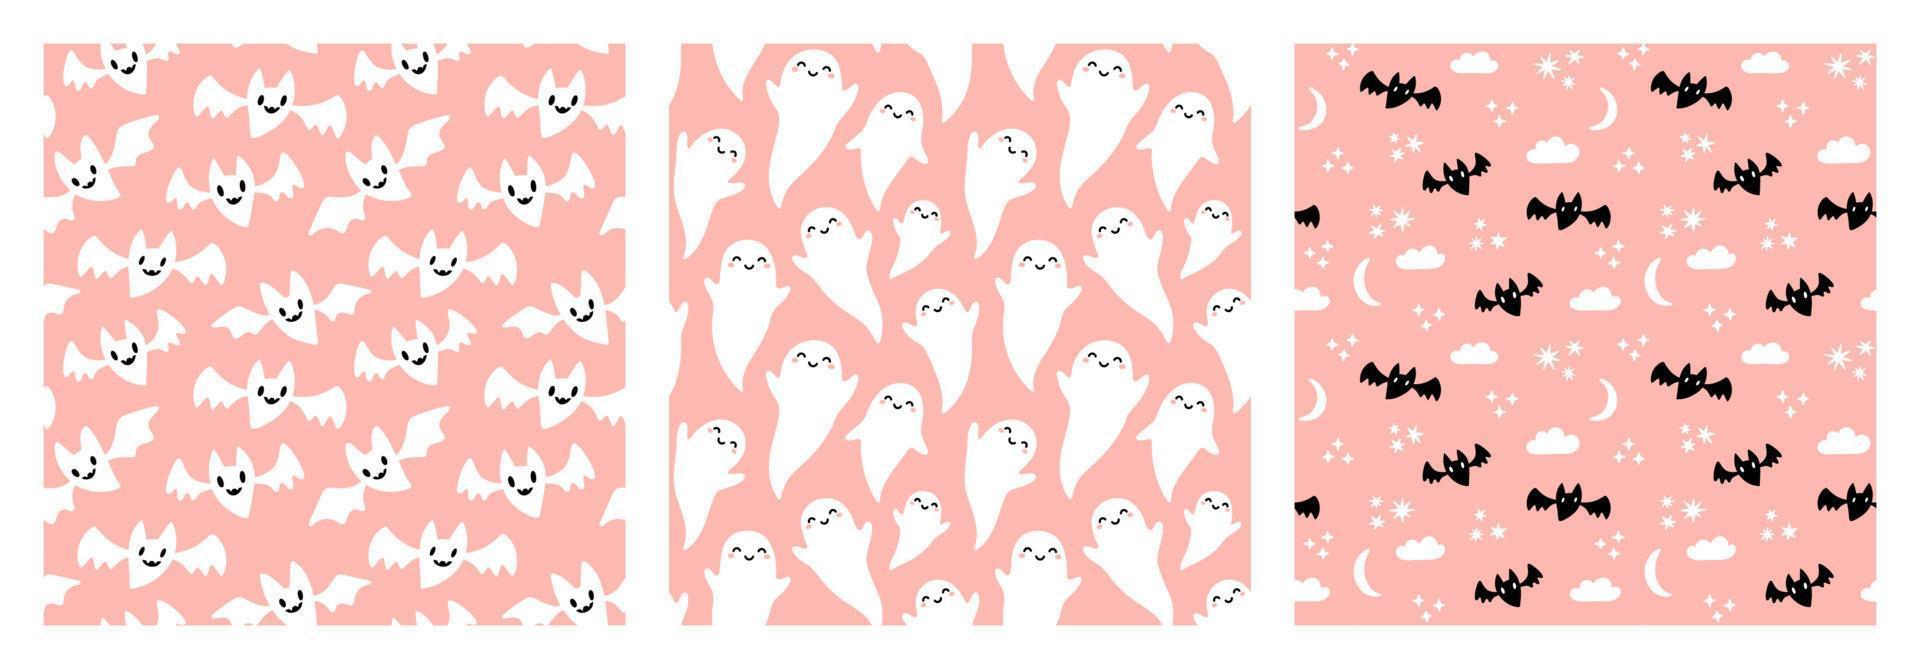 Cute black and white bats and ghosts Halloween seamless pattern set on pastel pink background. vector